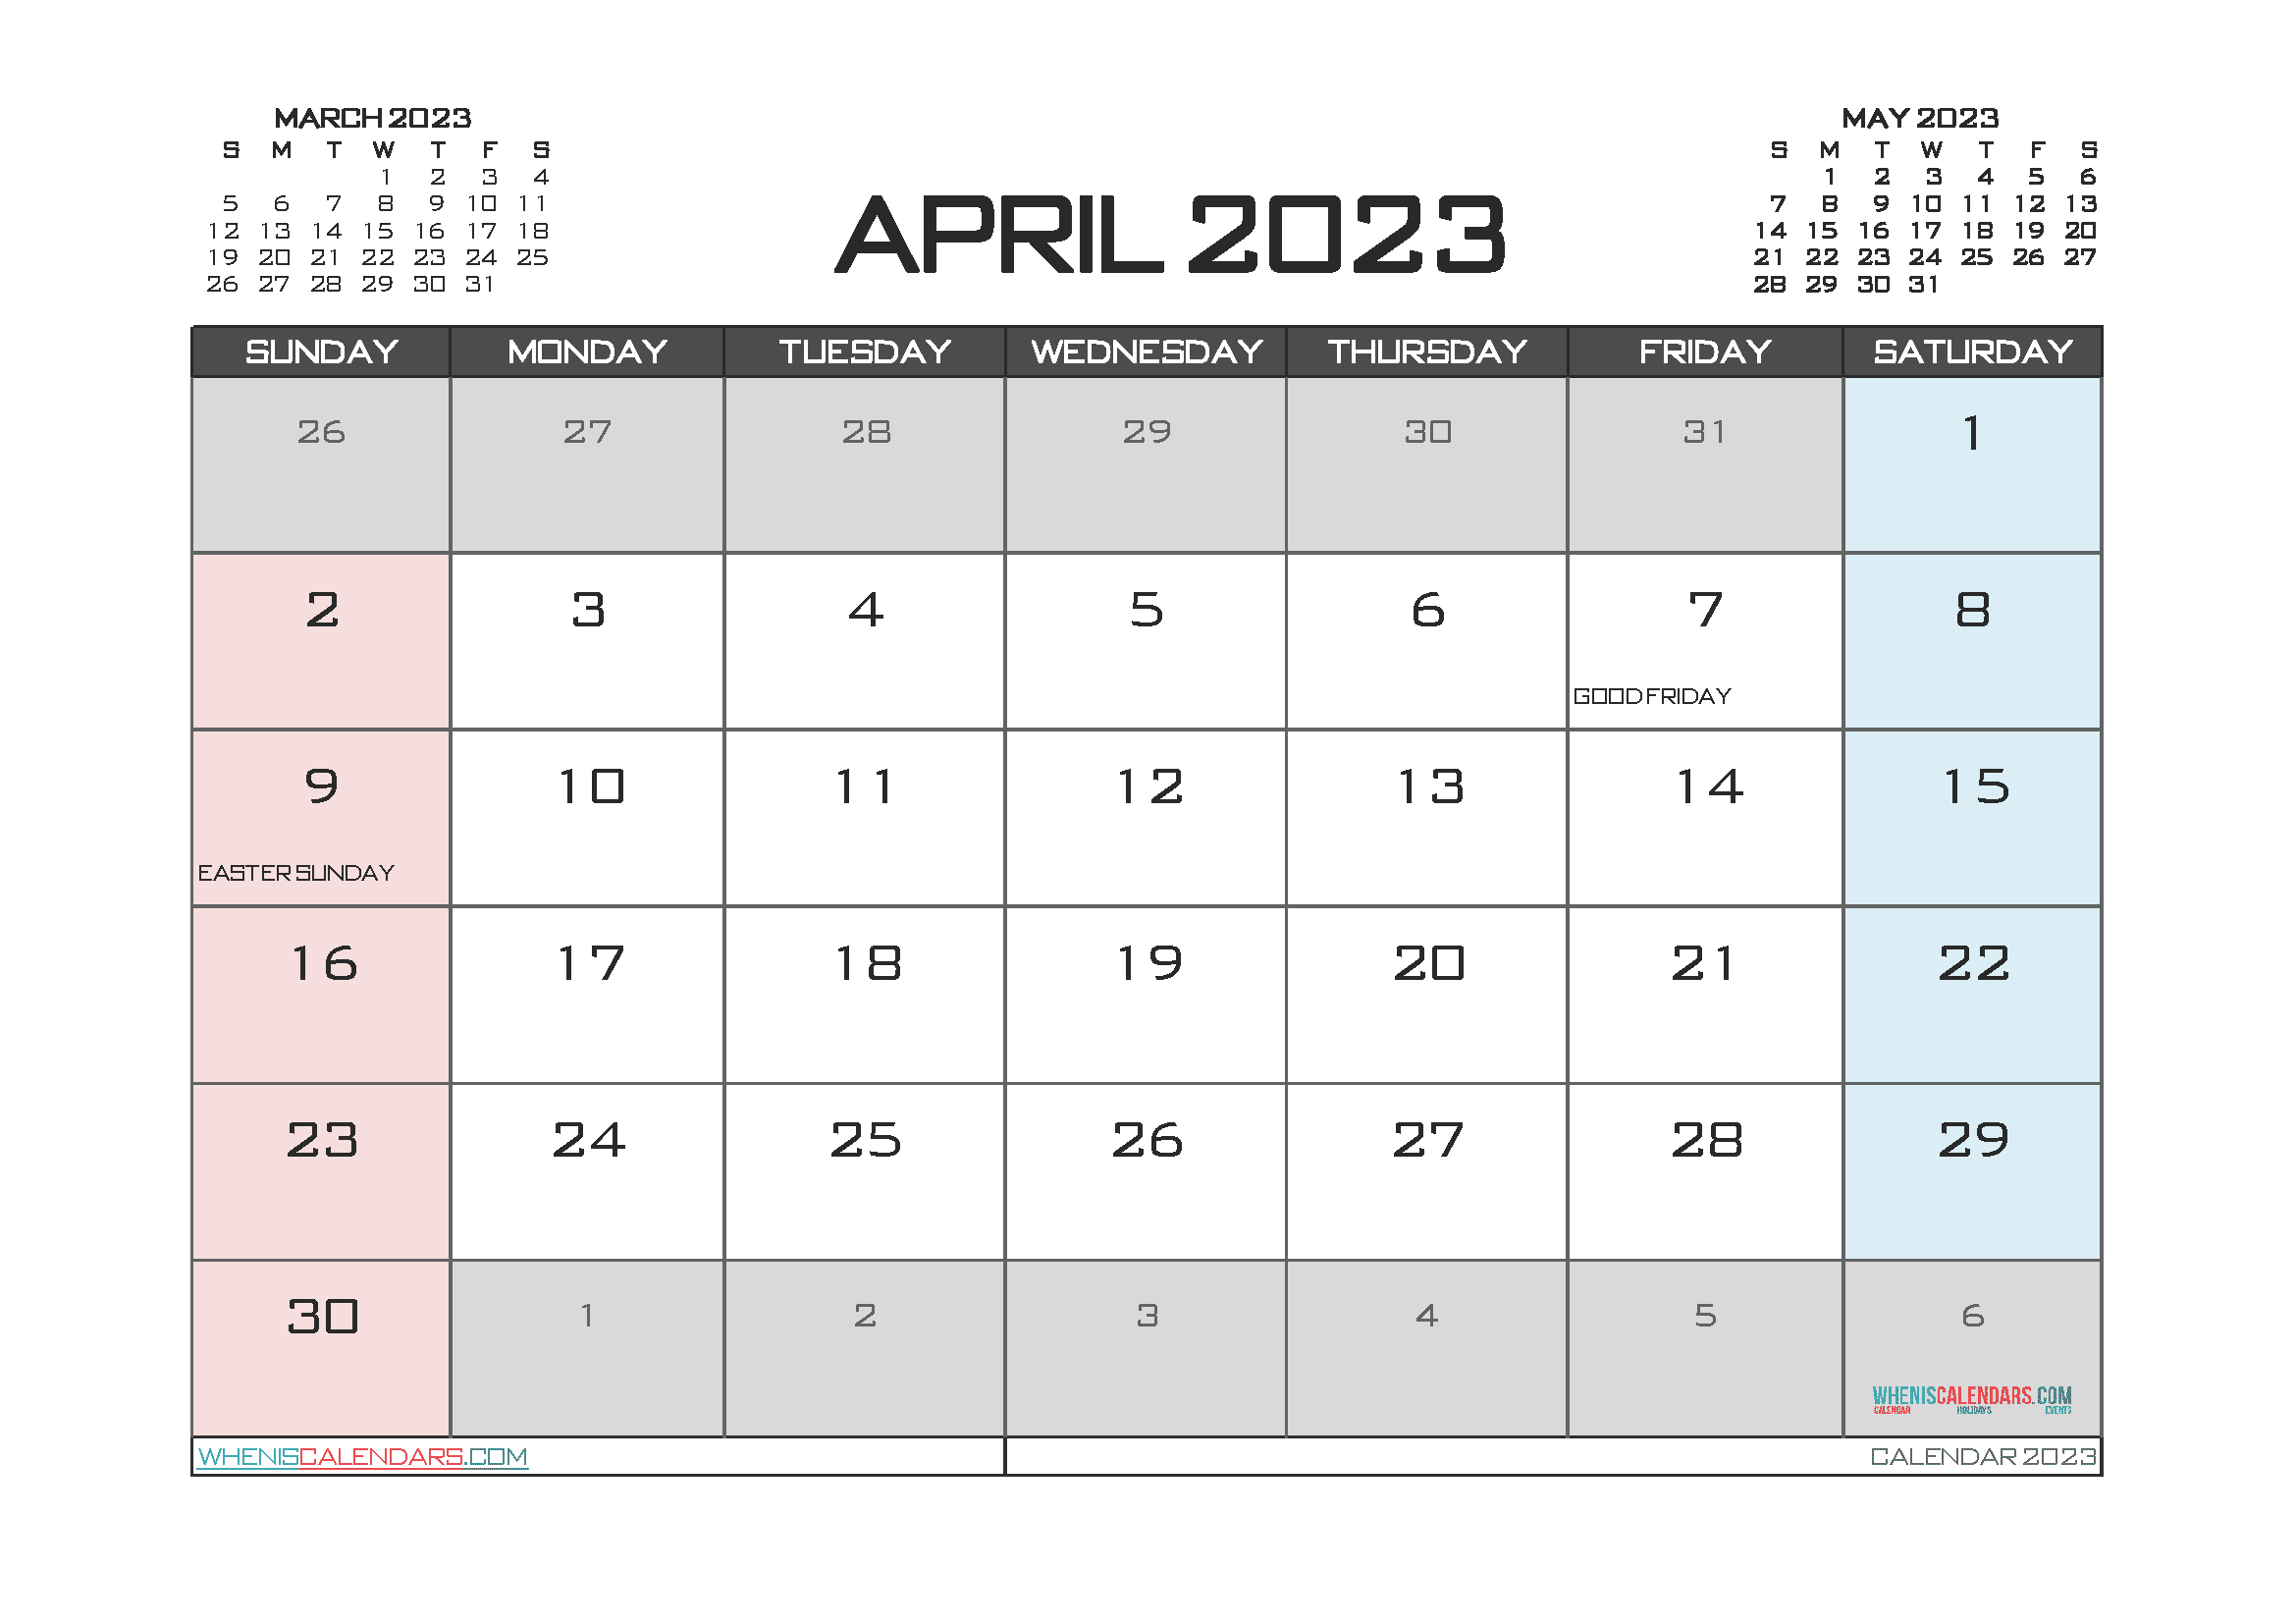 Free Printable April 2023 Calendar with Holidays PDF in Landscape